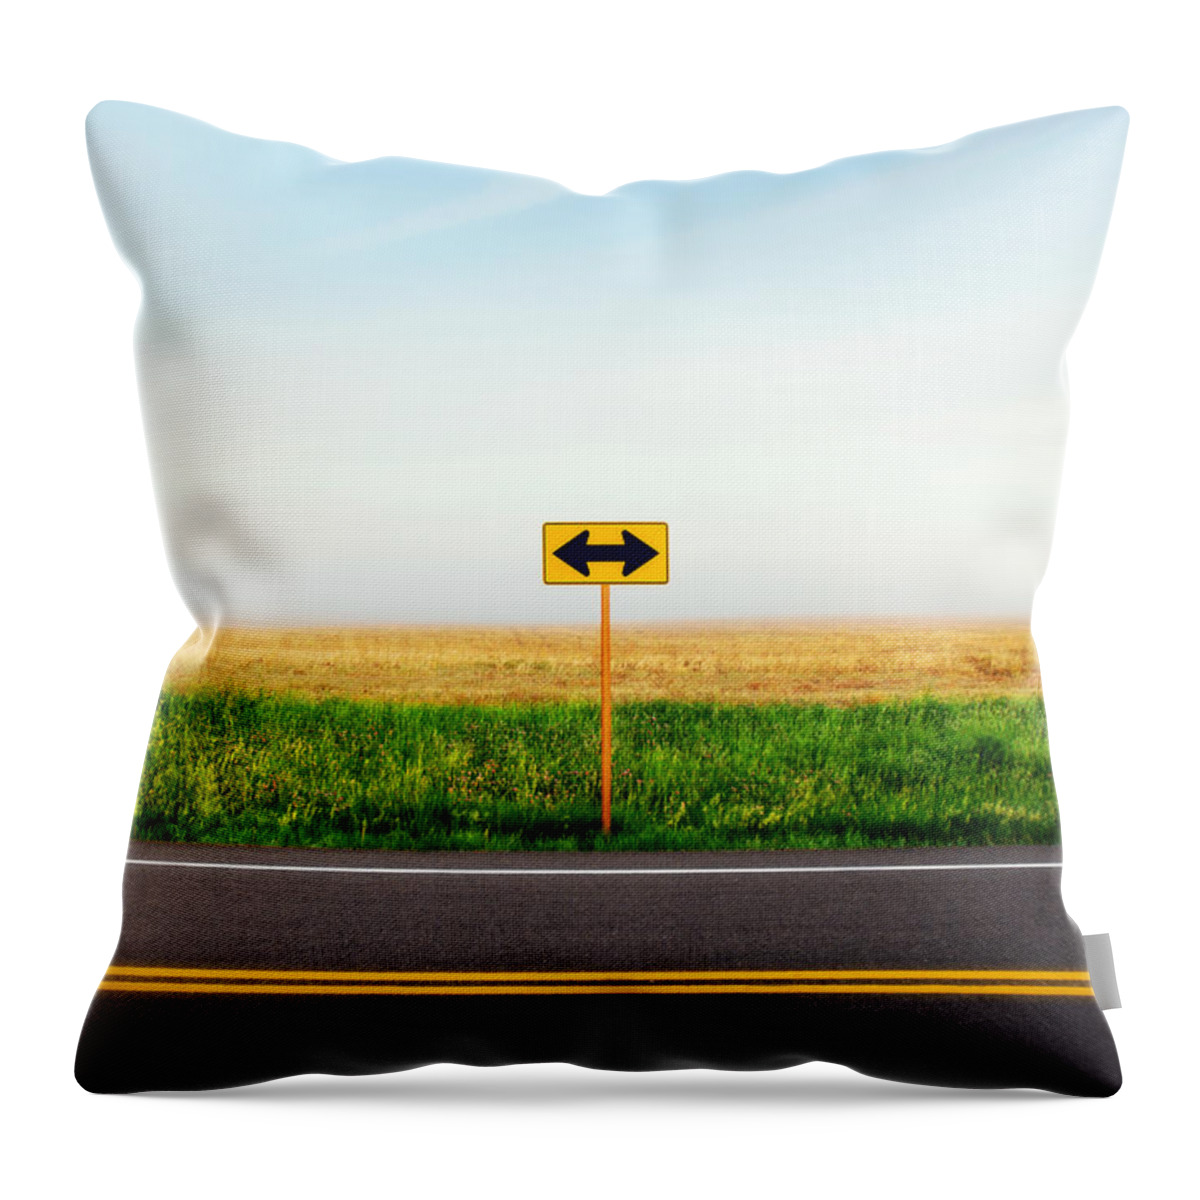 Crossroads Throw Pillow featuring the photograph Crossroads by Todd Klassy